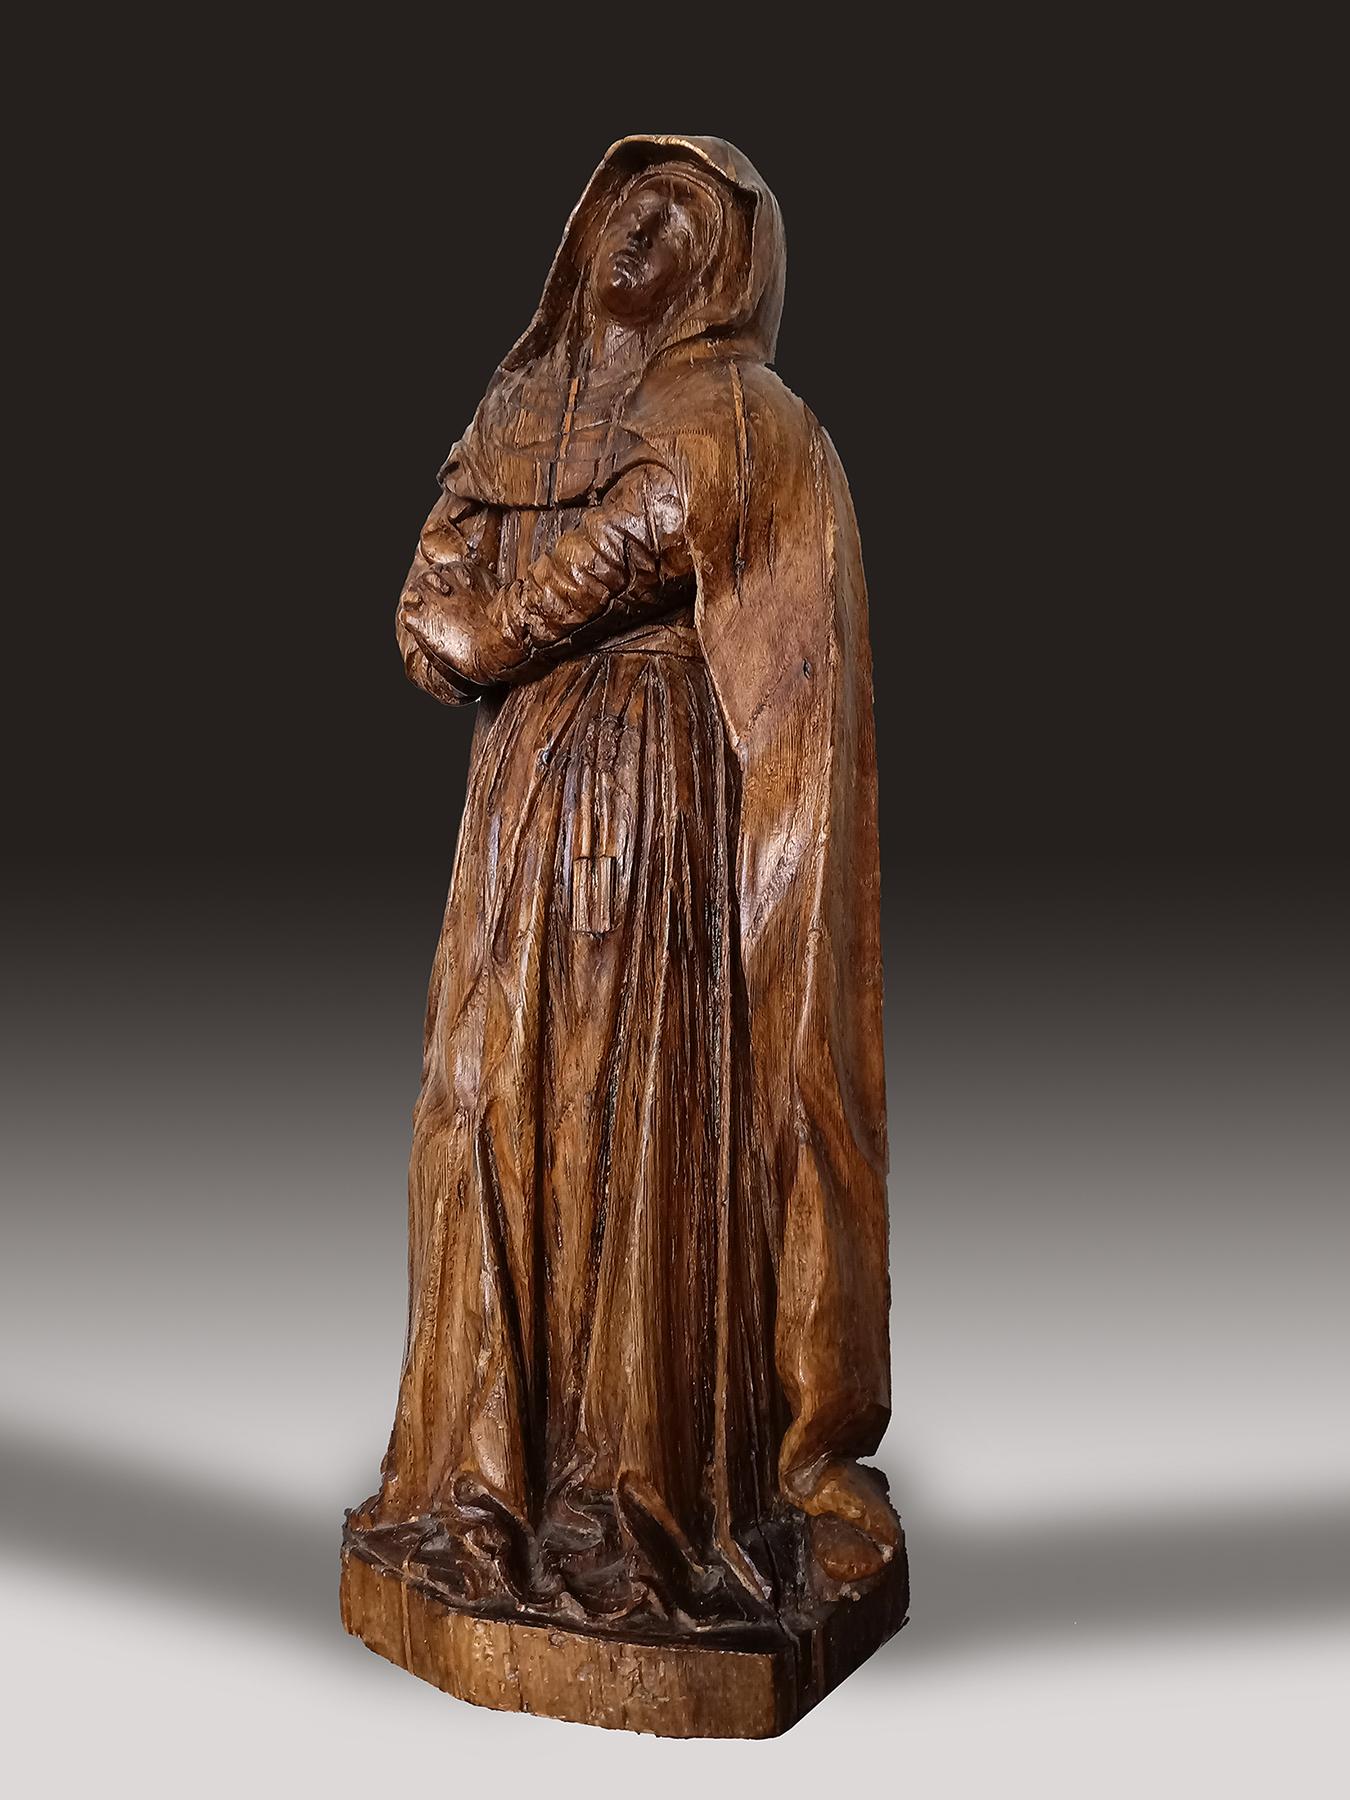 The Mourning Virgin
Probably South Netherlands, early 17th century
Oak; approximate size: 36.5 cm (h)

A 17th century oak figure of the Mourning Virgin carved in-the-round with an integral octagonal base. This figure probably once flanked the